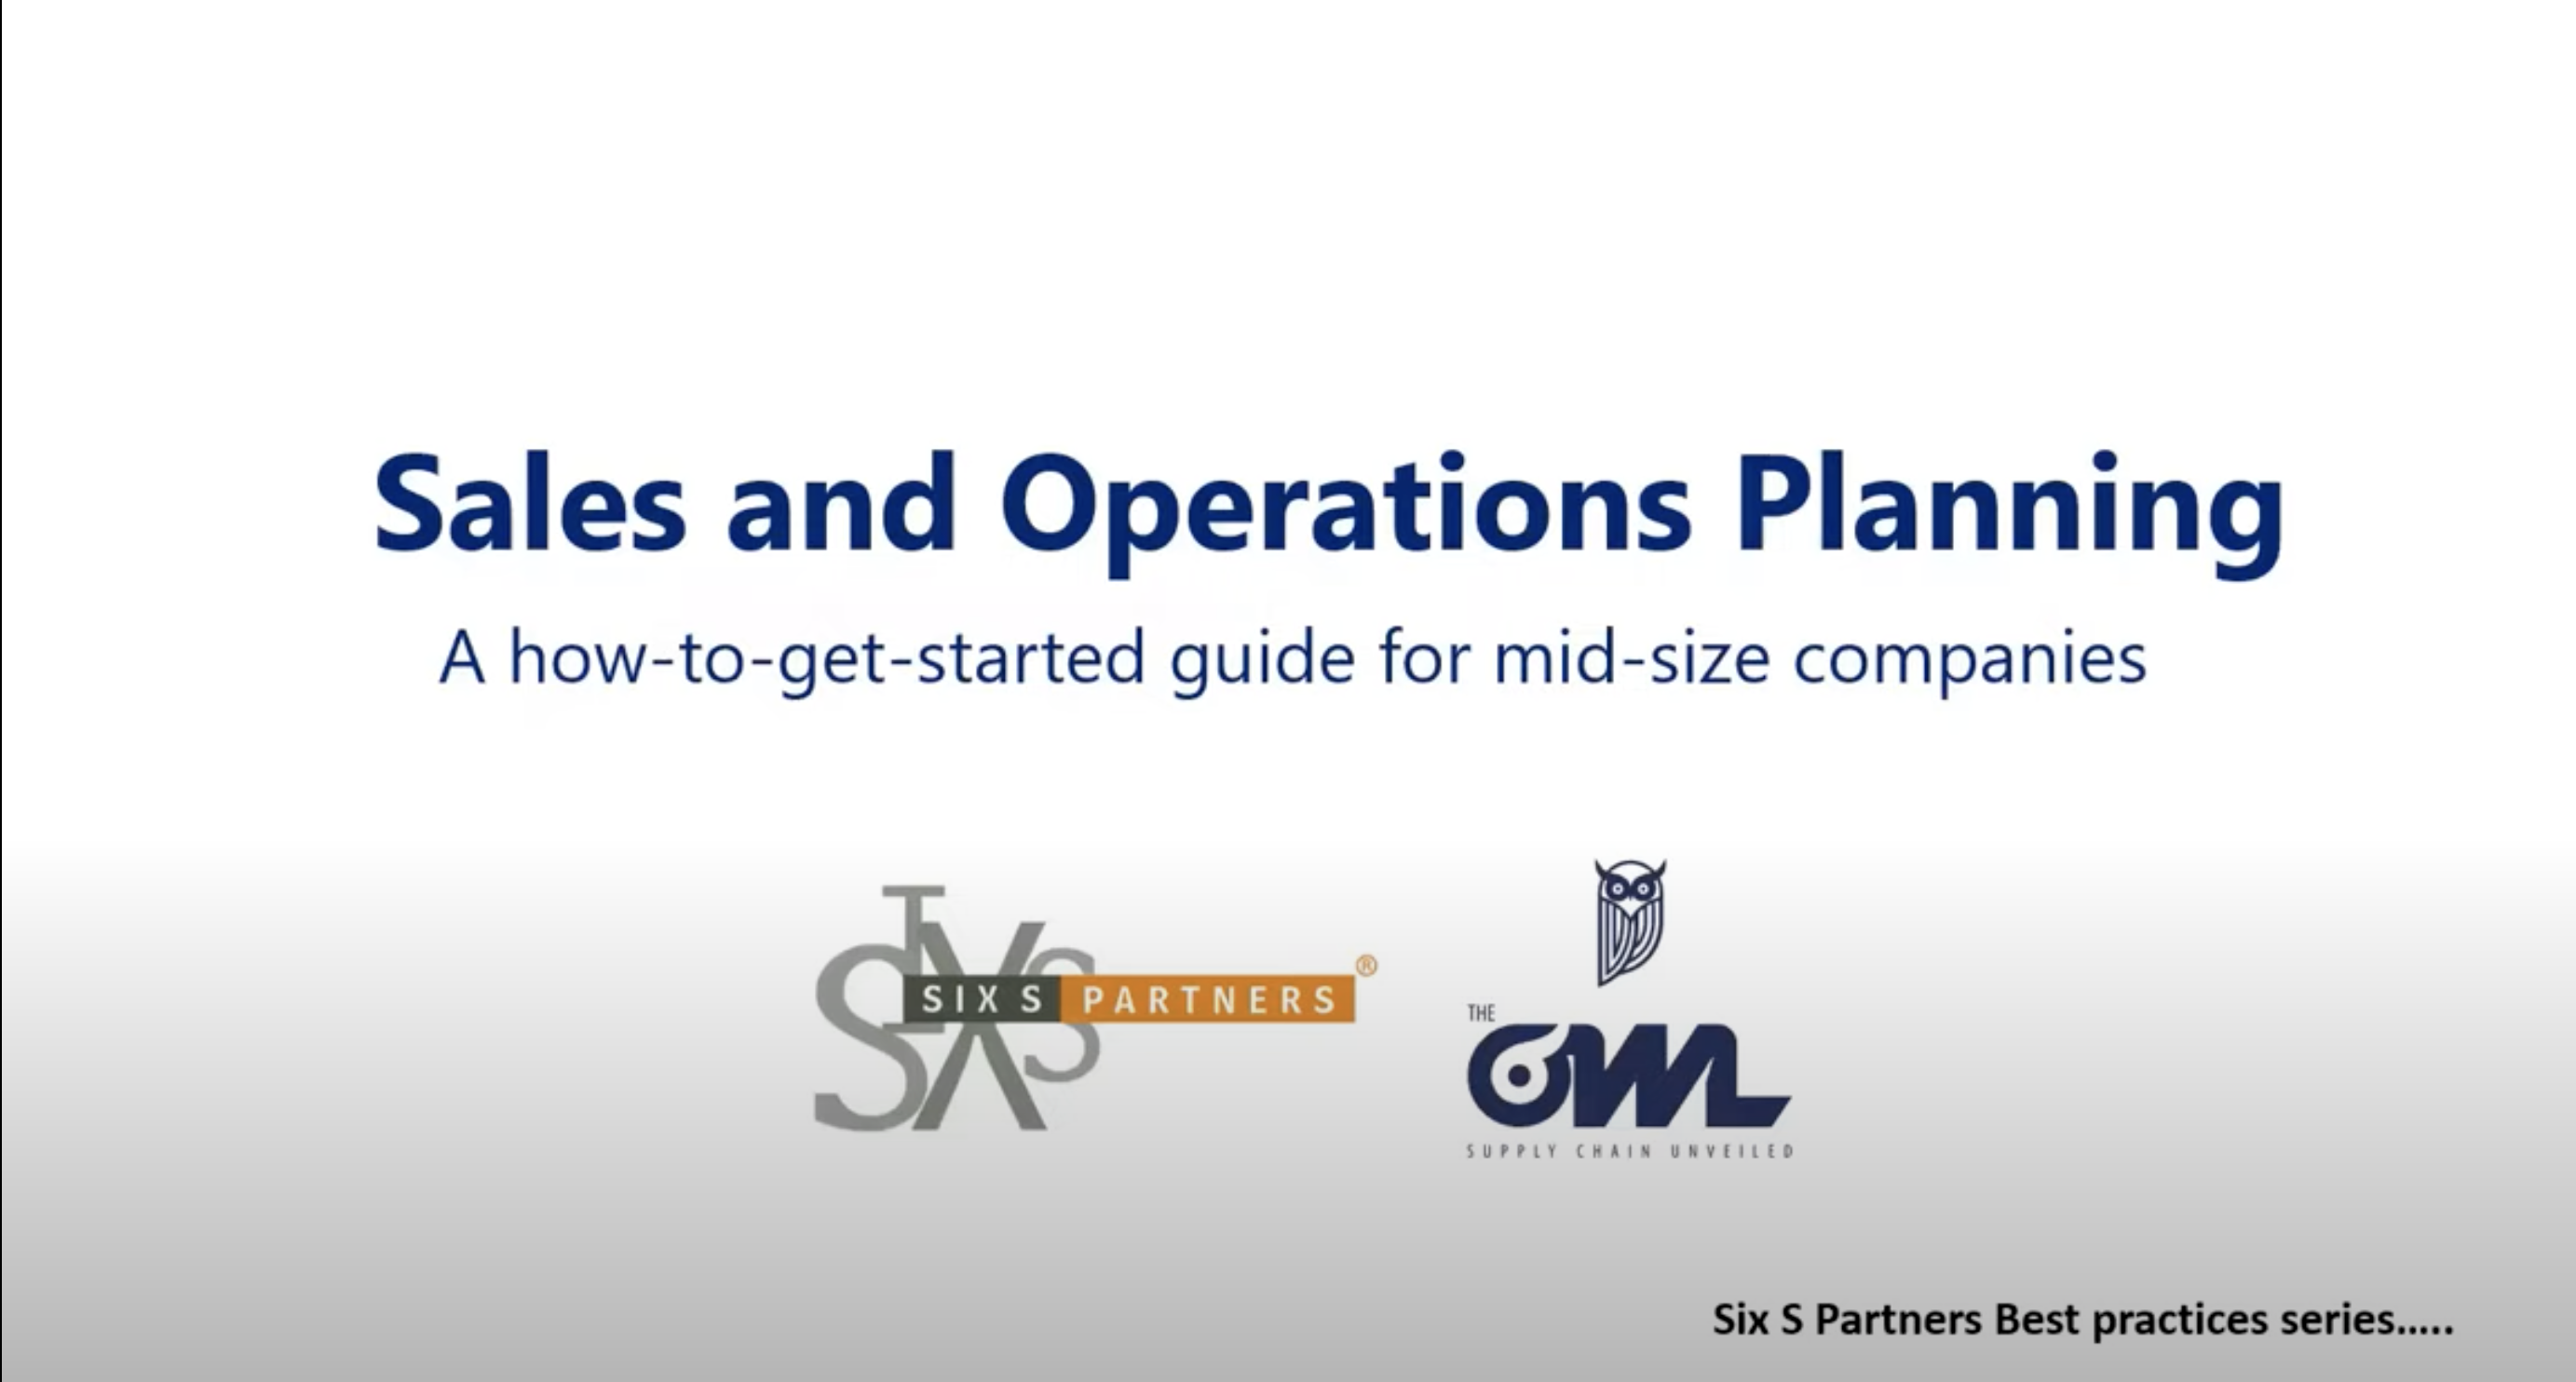 Sales and operations planning. A how-to-get-started guide for mid-size companies.